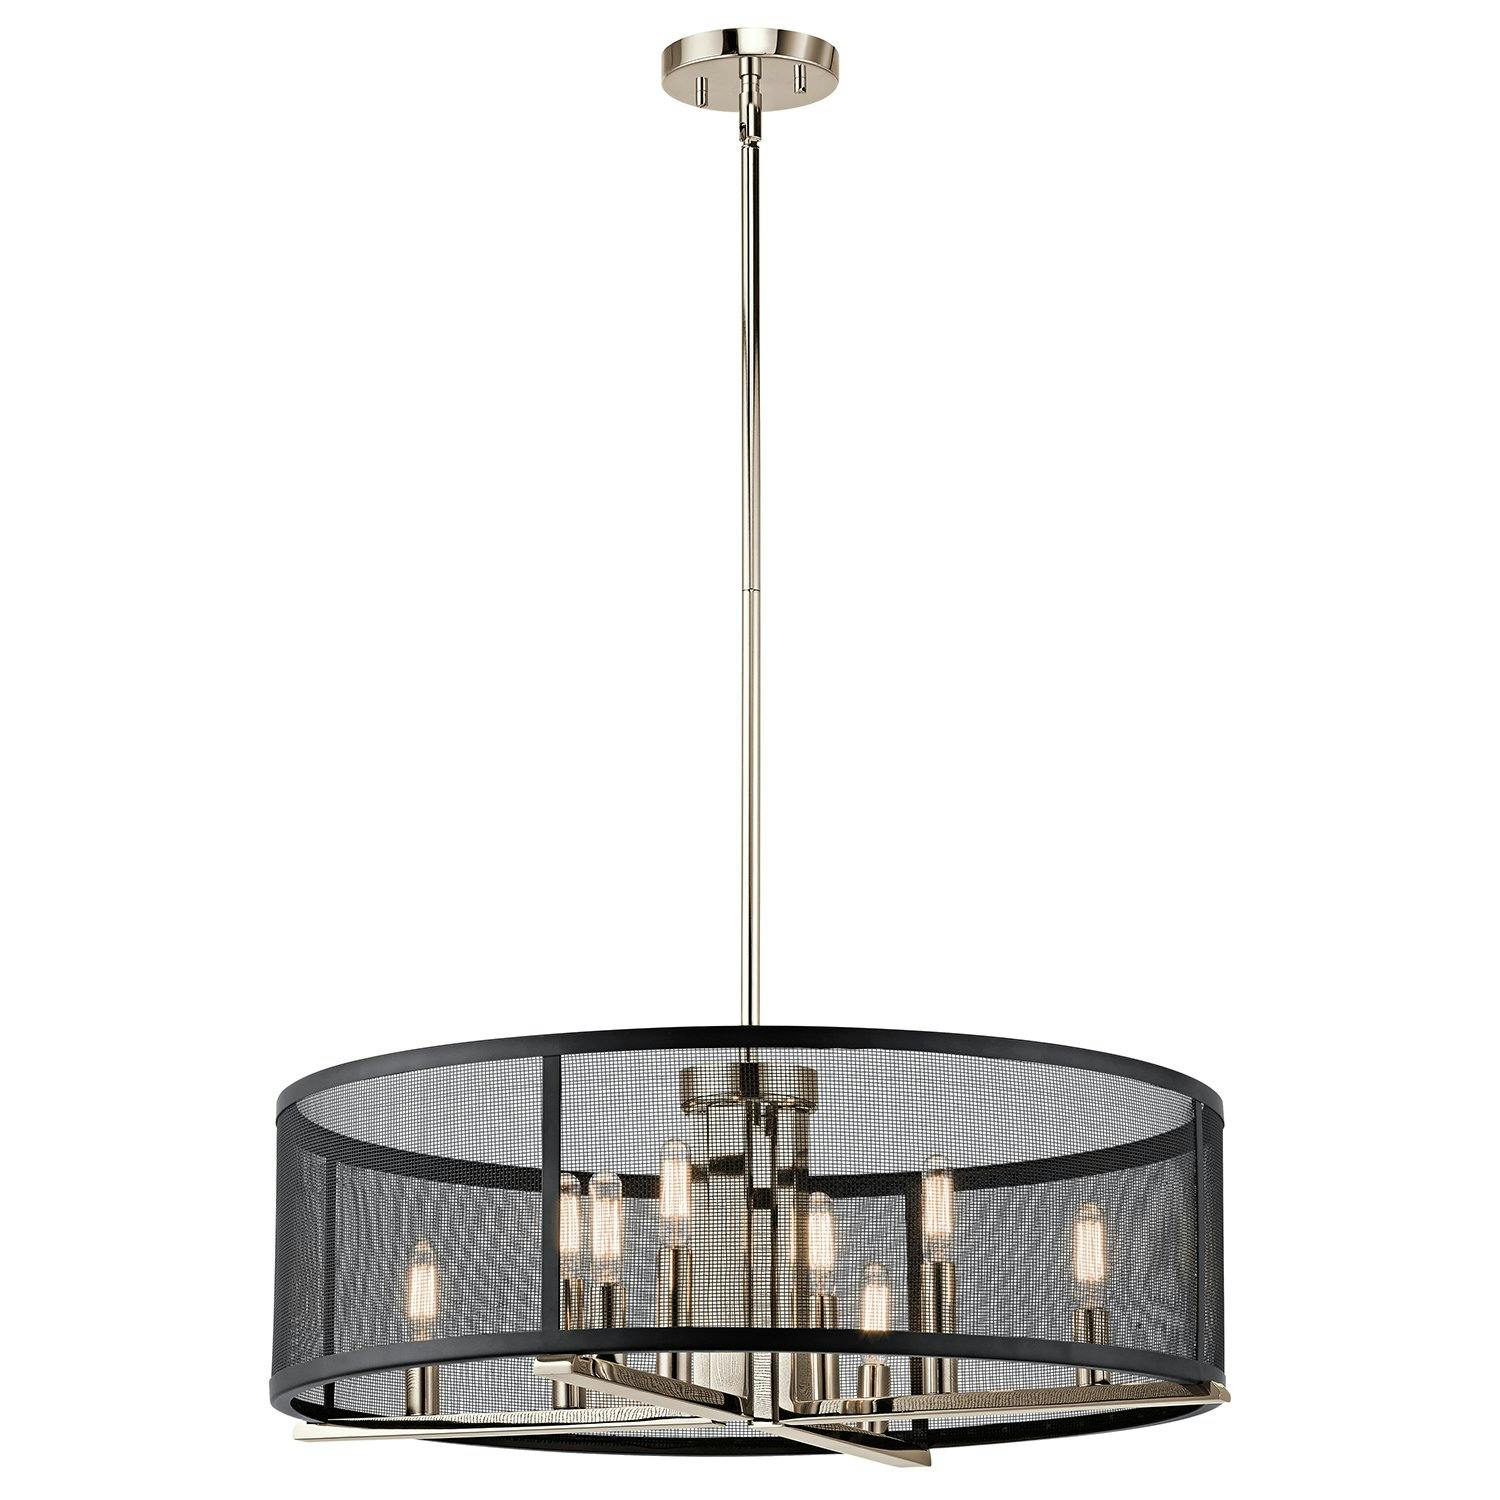 Titus 9.75" 8 Light Chandelier in Nickel on a white background